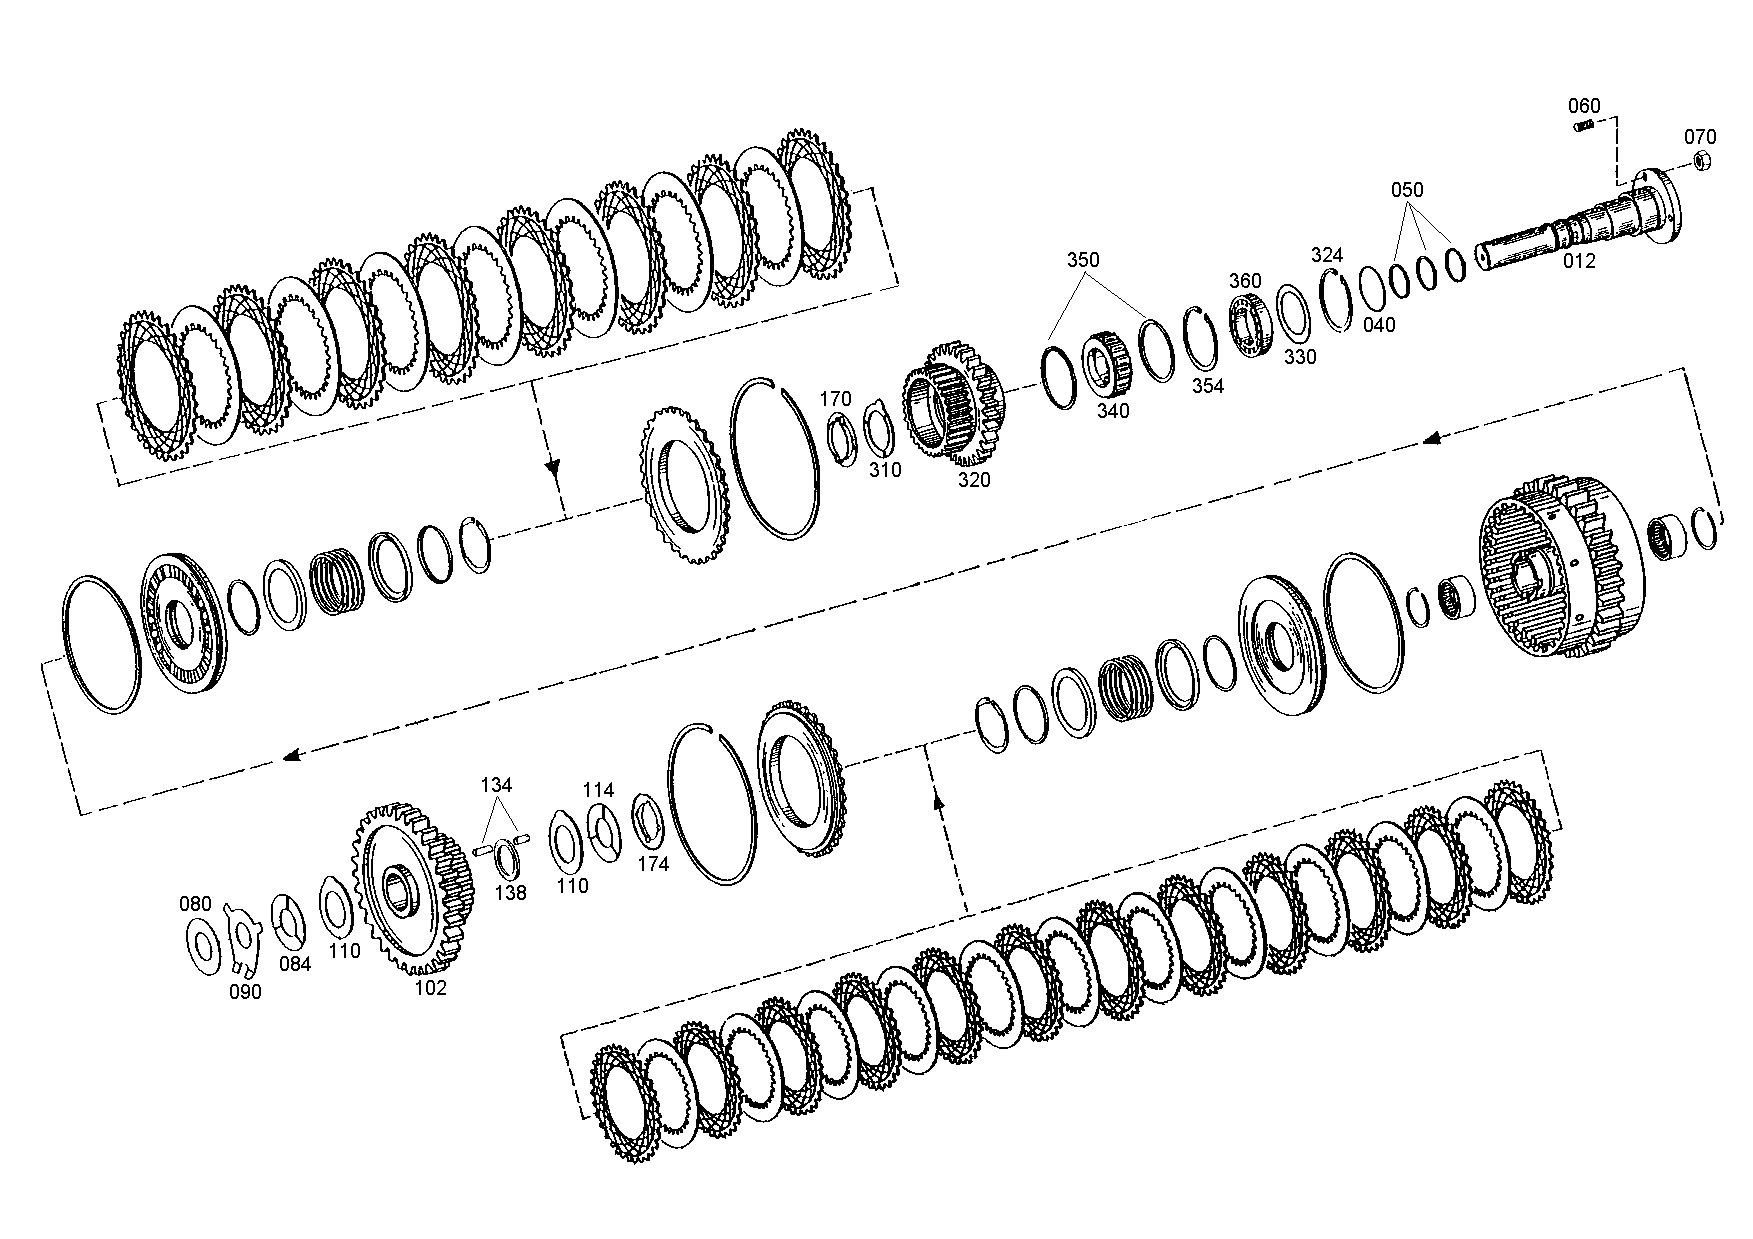 drawing for PPM 8052078 - ANGLE RING (figure 4)